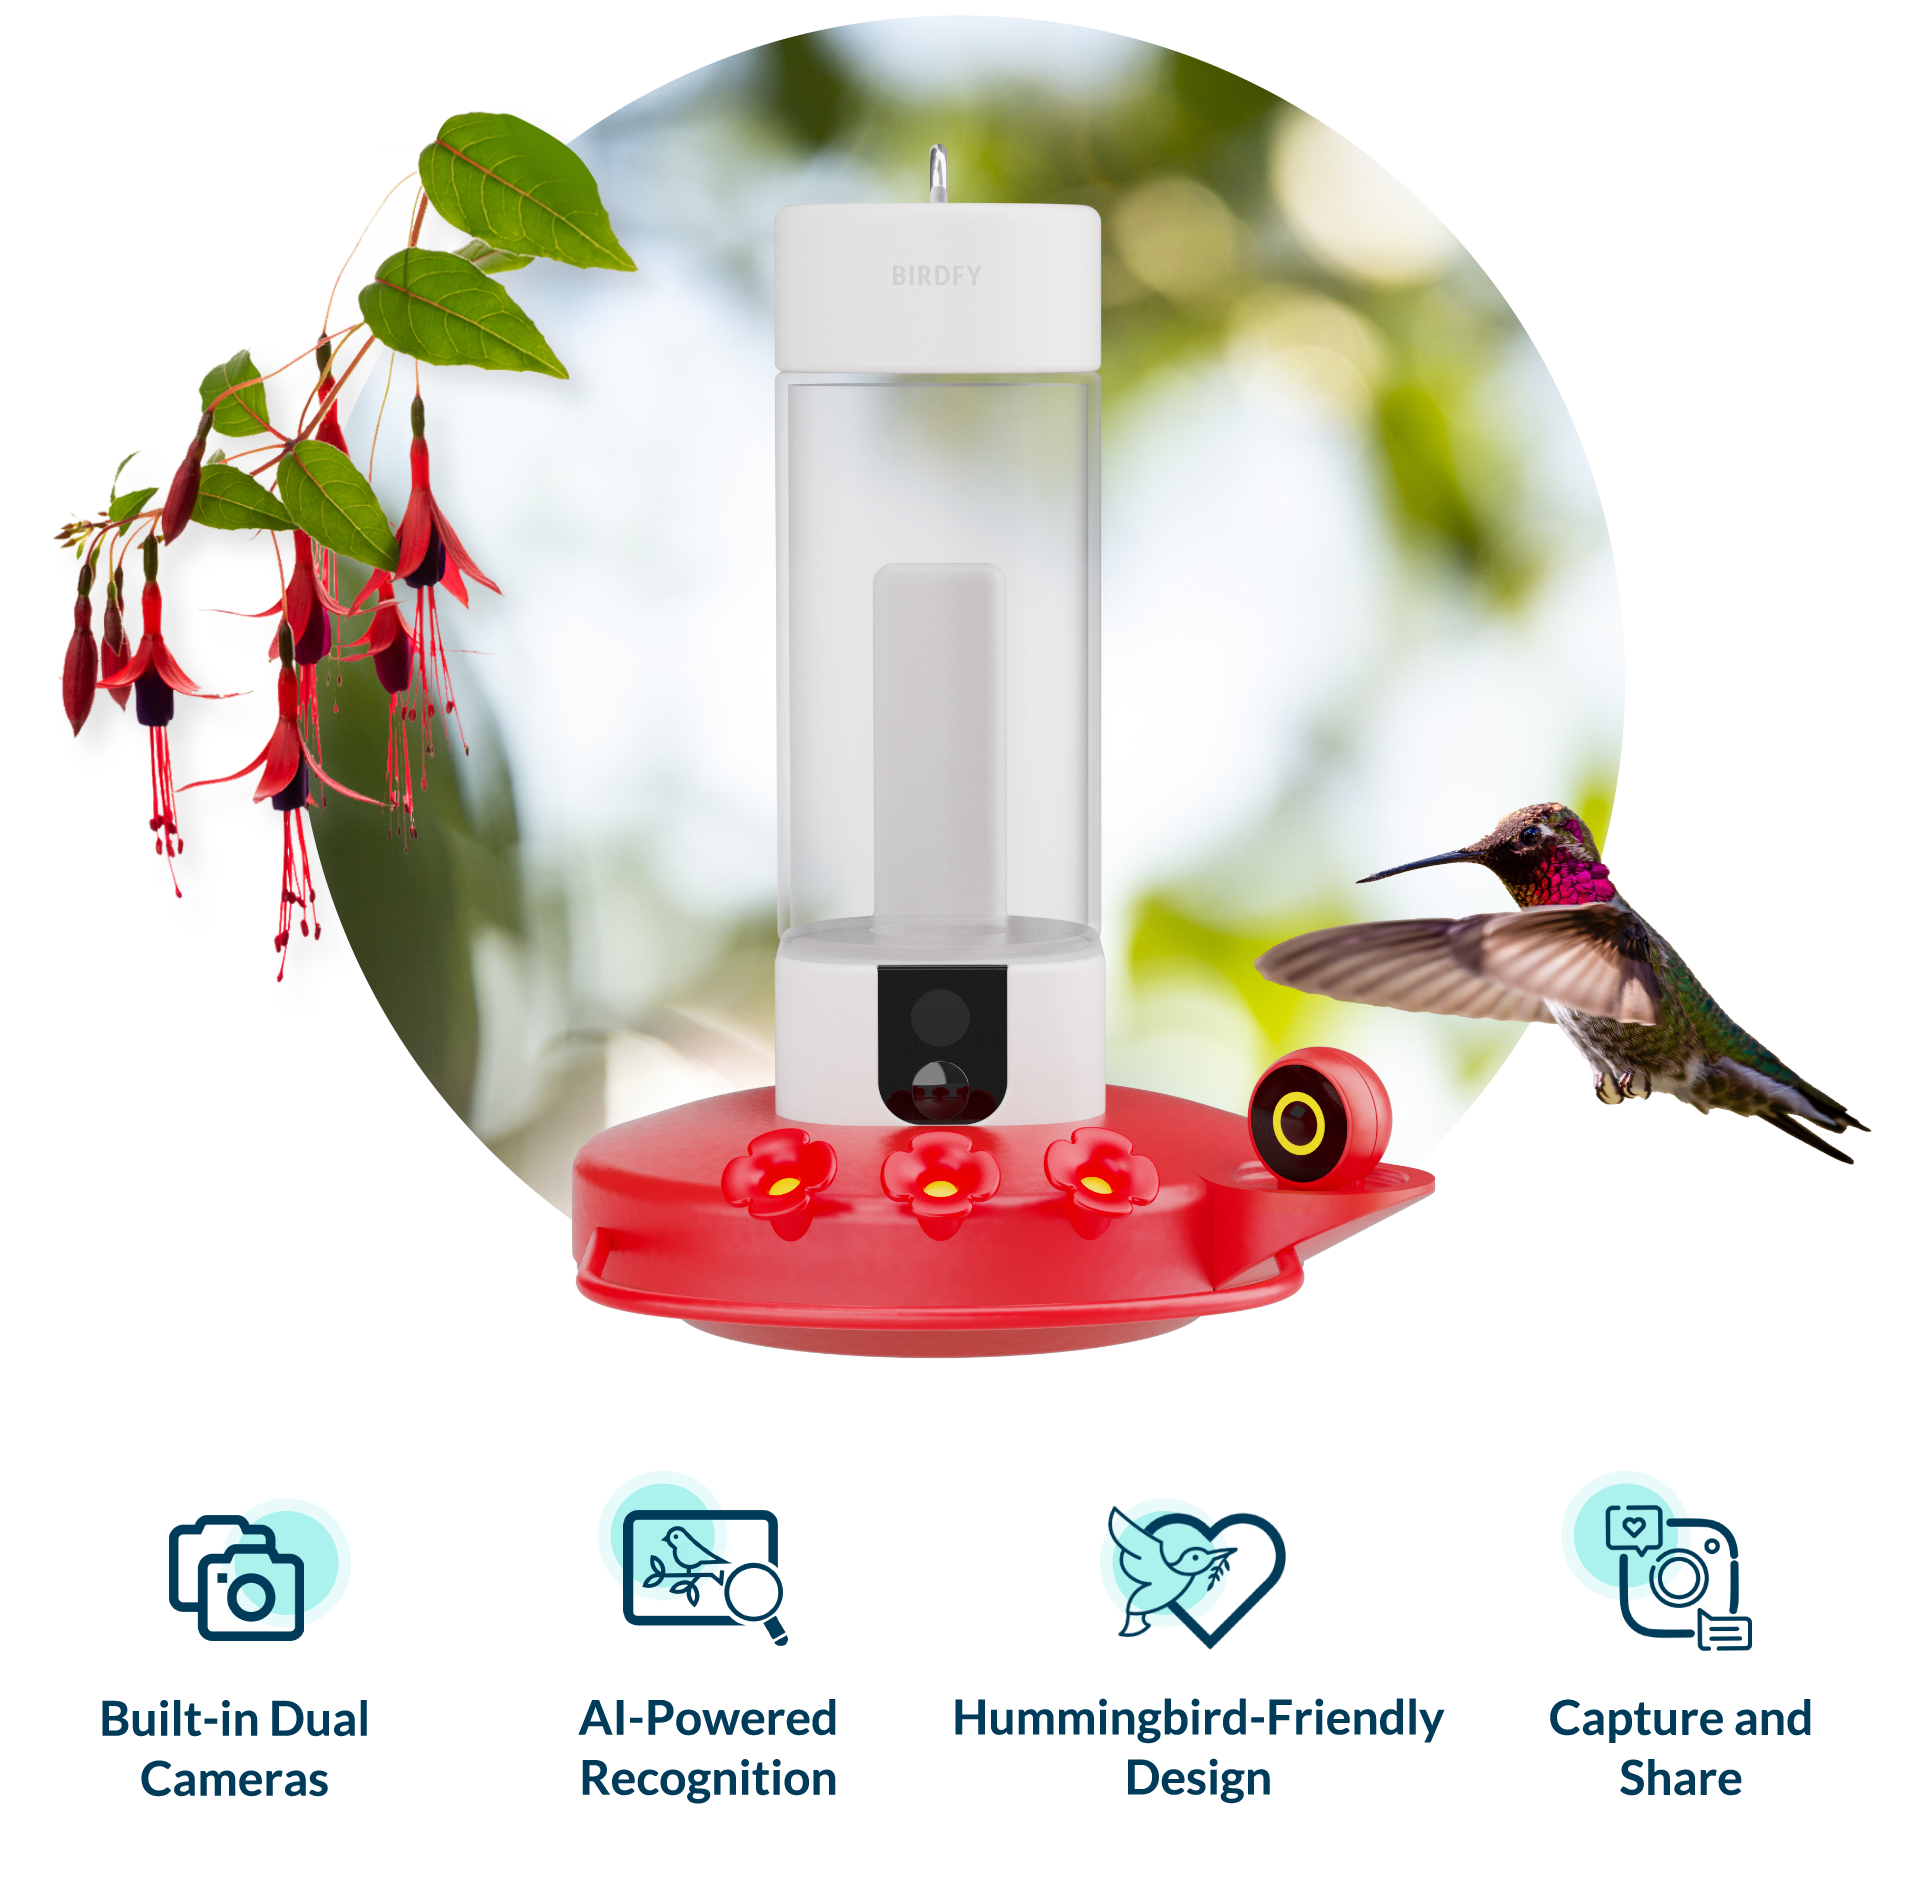 Attract Hummingbirds Easily with Birdfy Hummee Extension – netvue